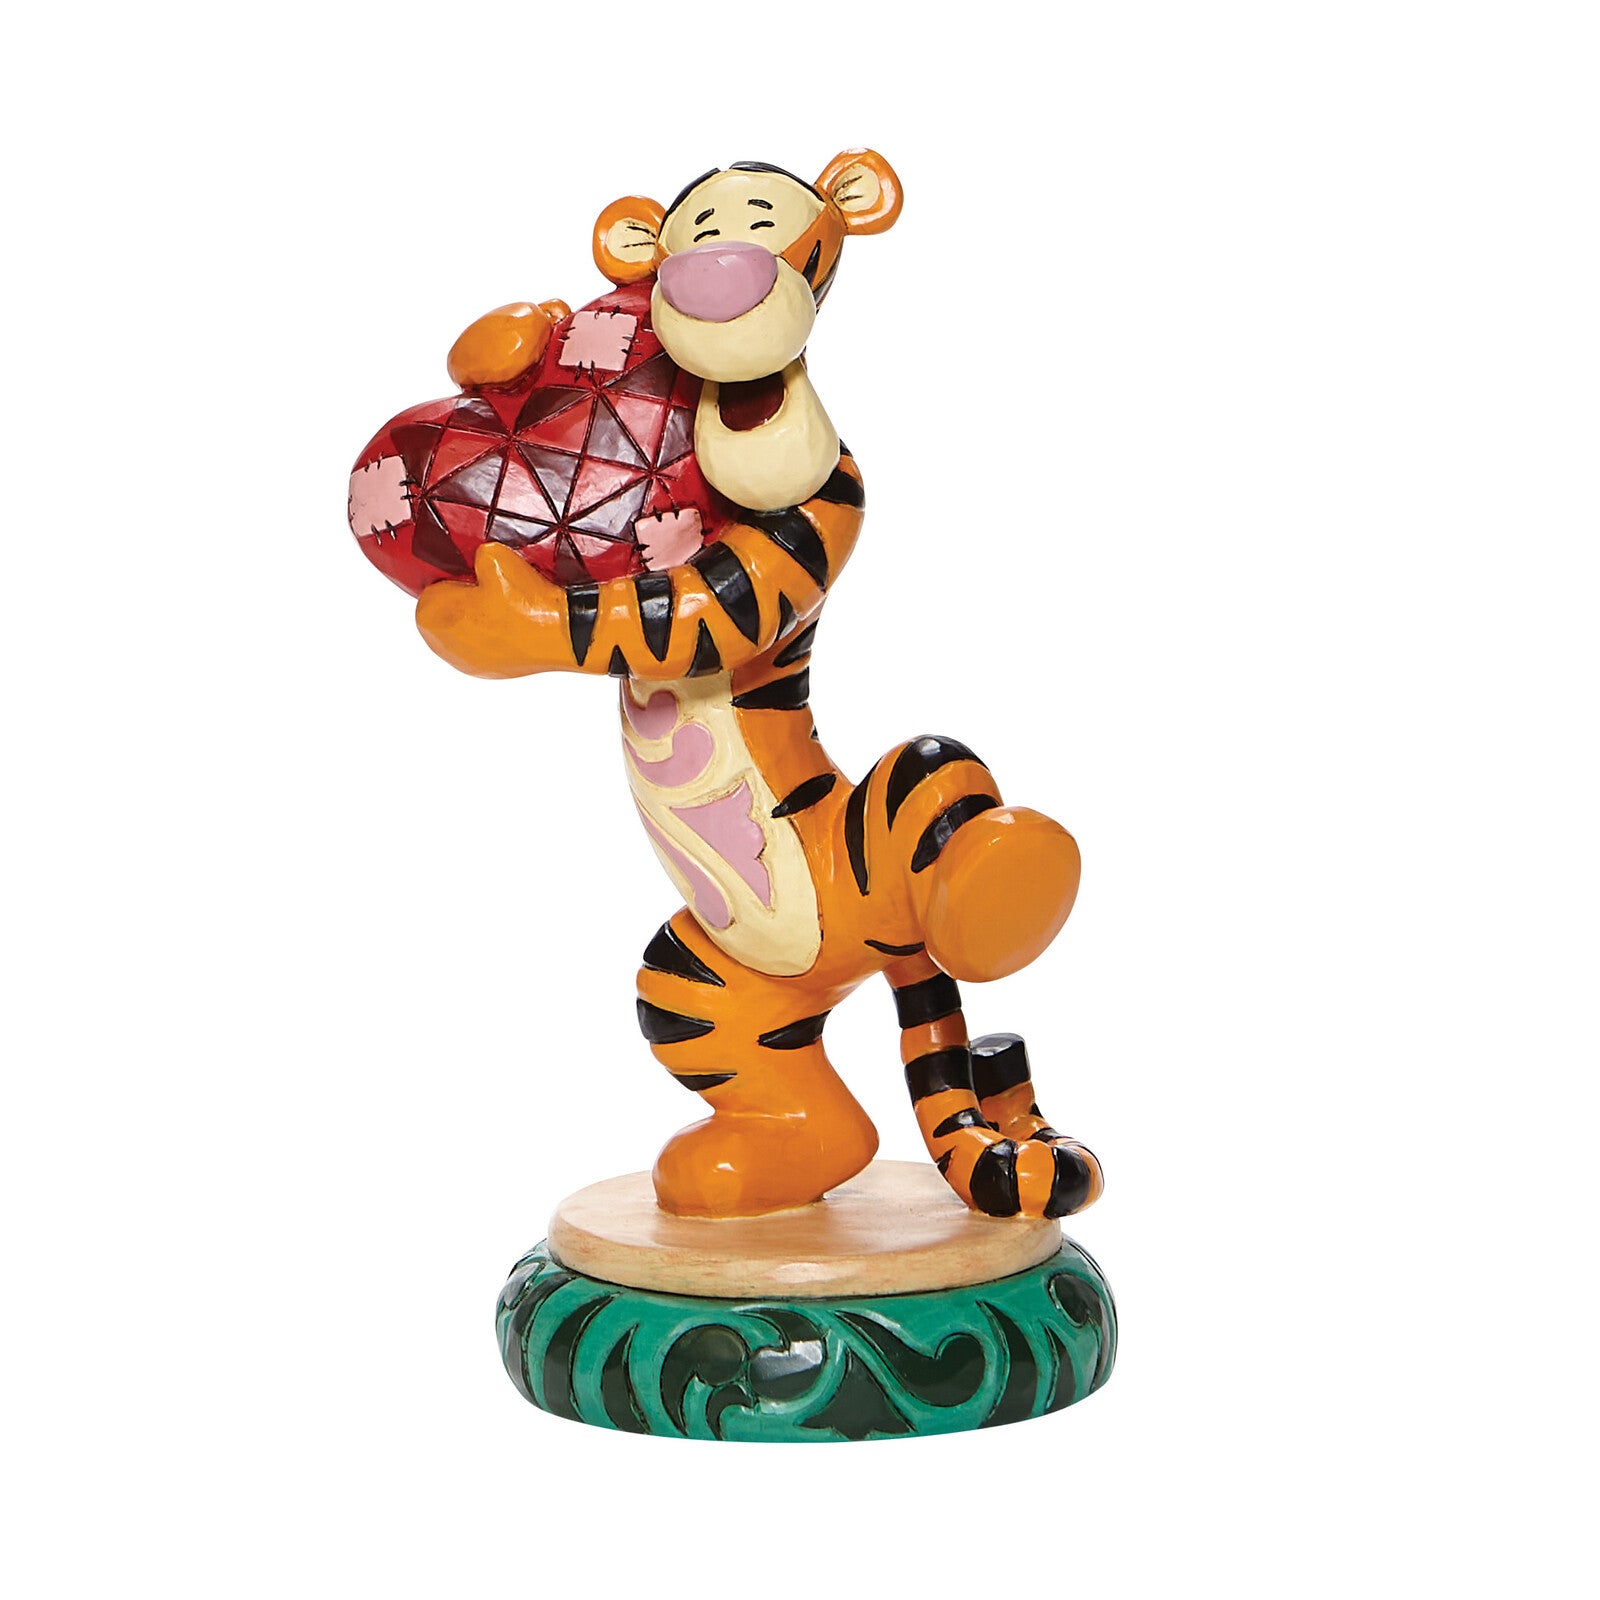 DISNEY TRADITIONS TIGGER HOLDING HEART FIGURINE - Gifts R Us